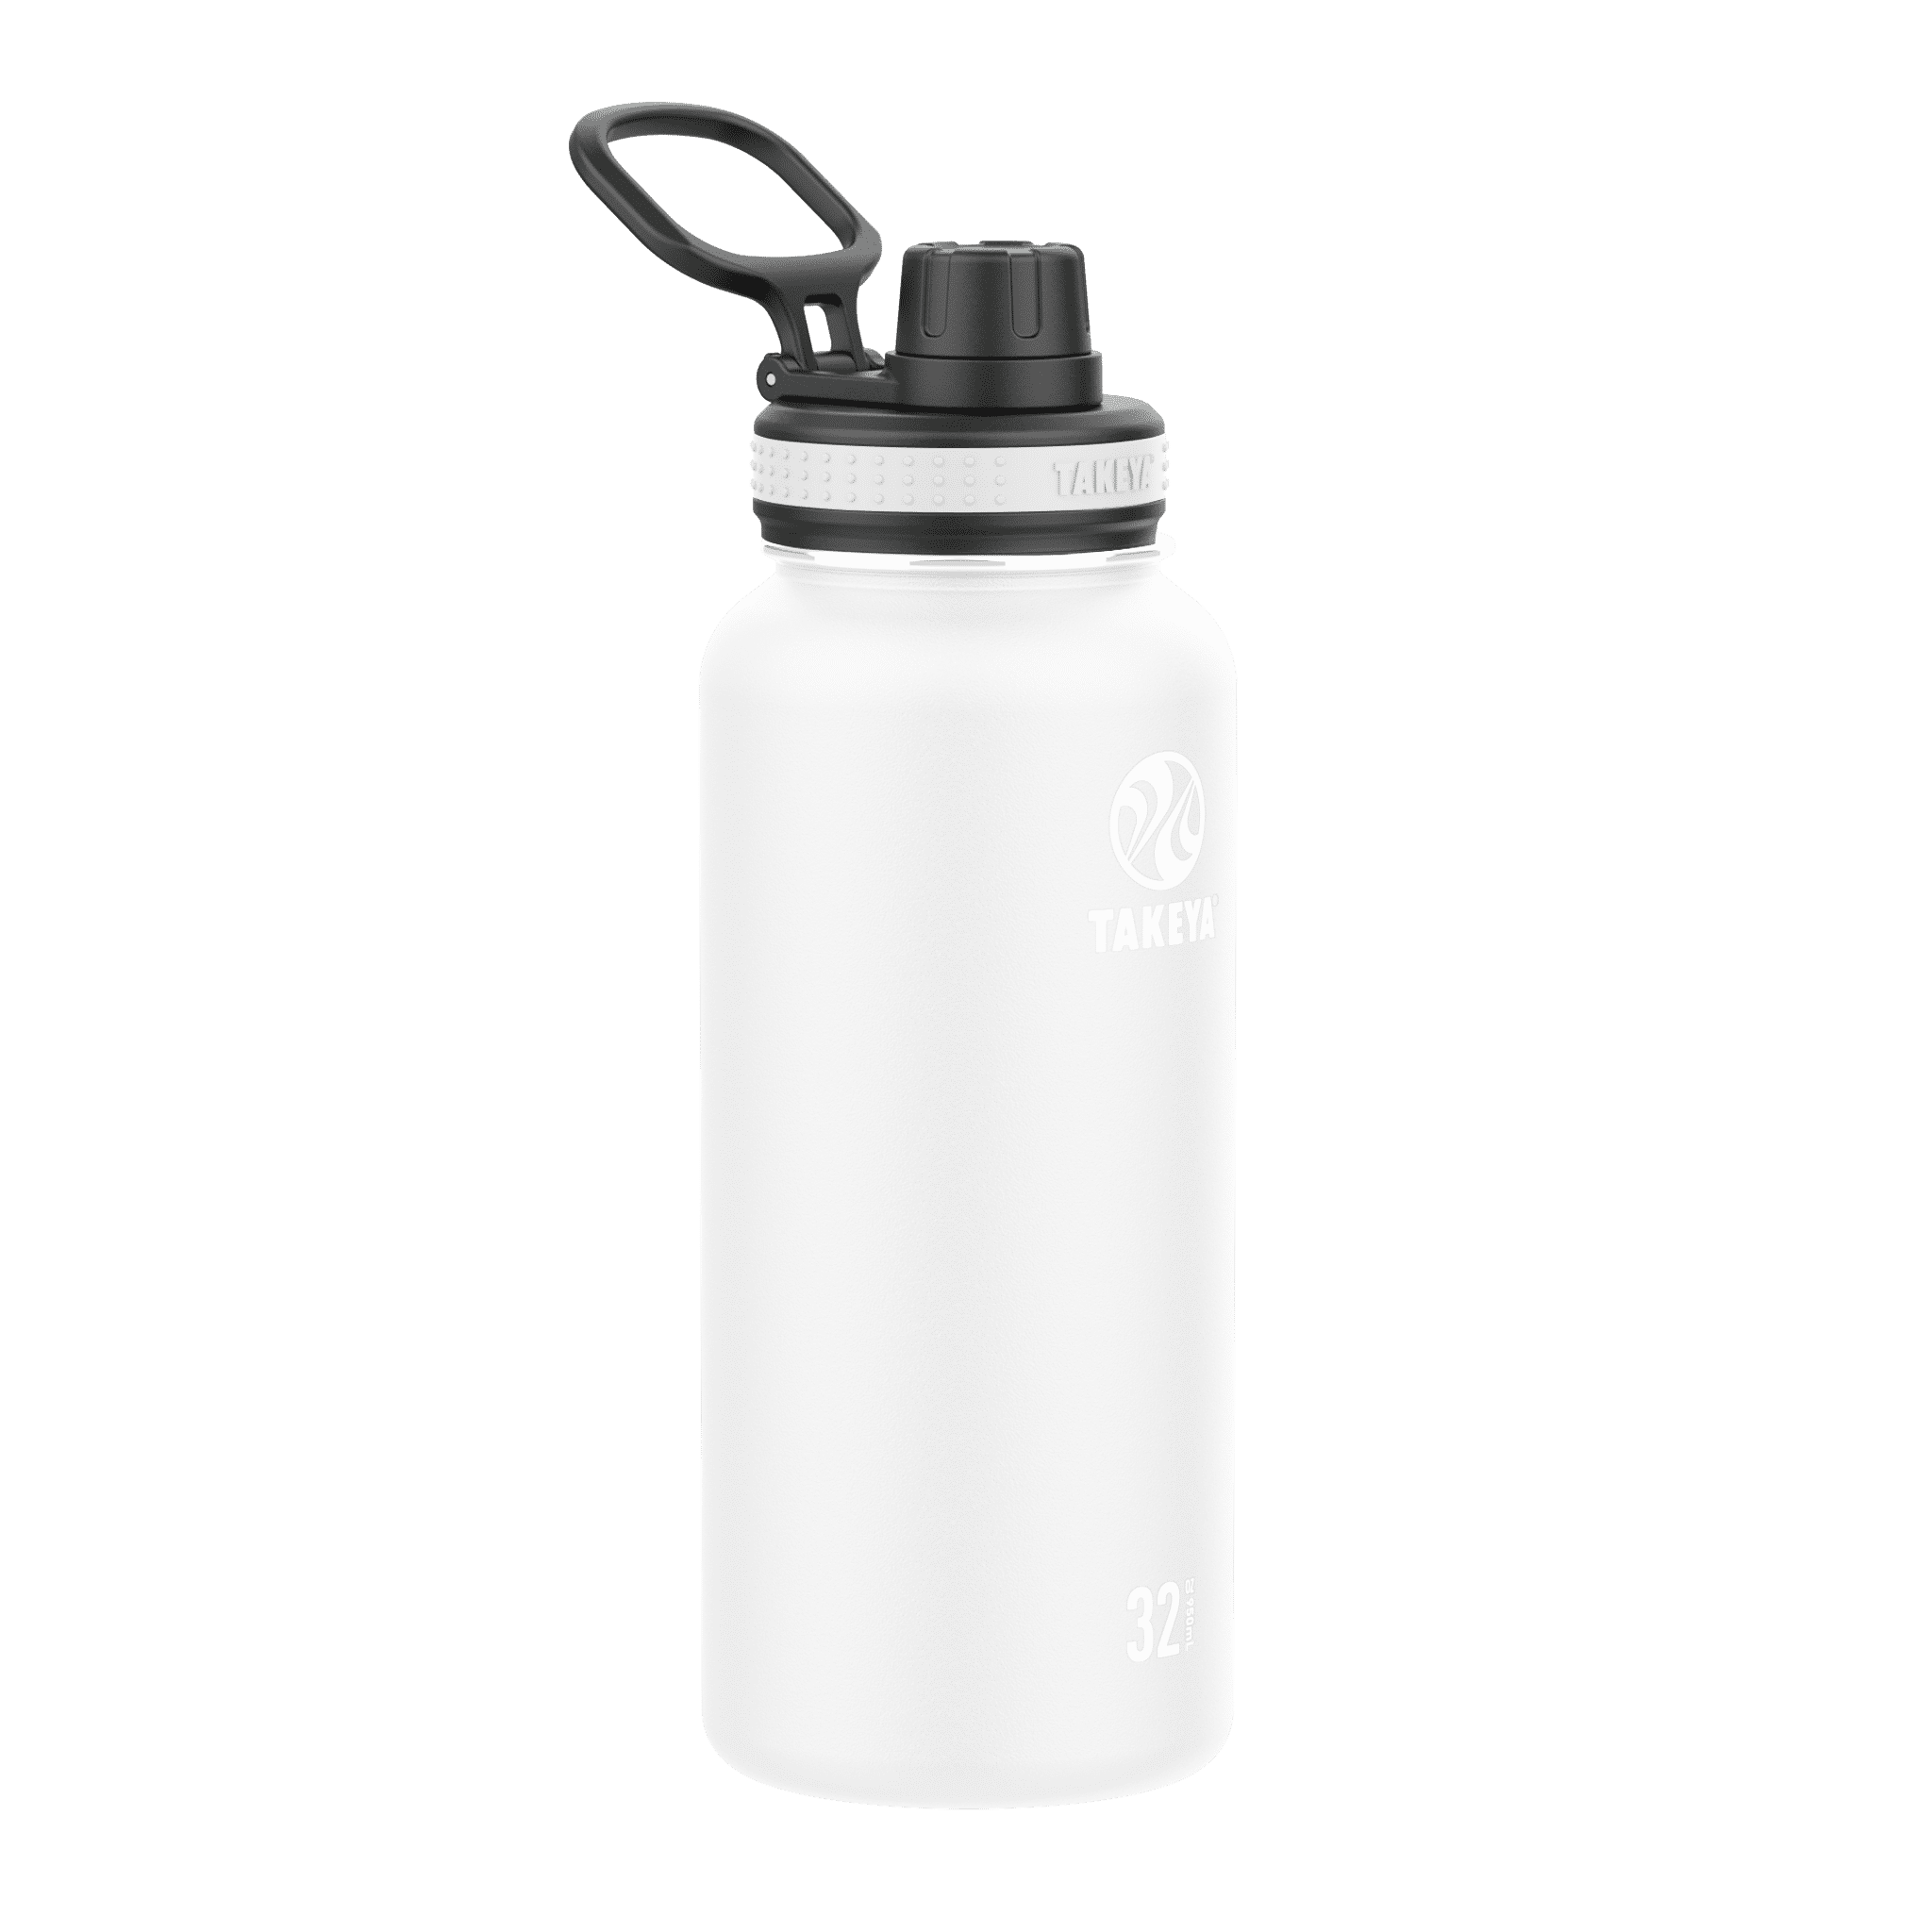 Takeya Originals 32 oz White and Black Double Wall Vacuum Insulated  Stainless Steel Water Bottle with Wide Mouth and Flip-Top Lid